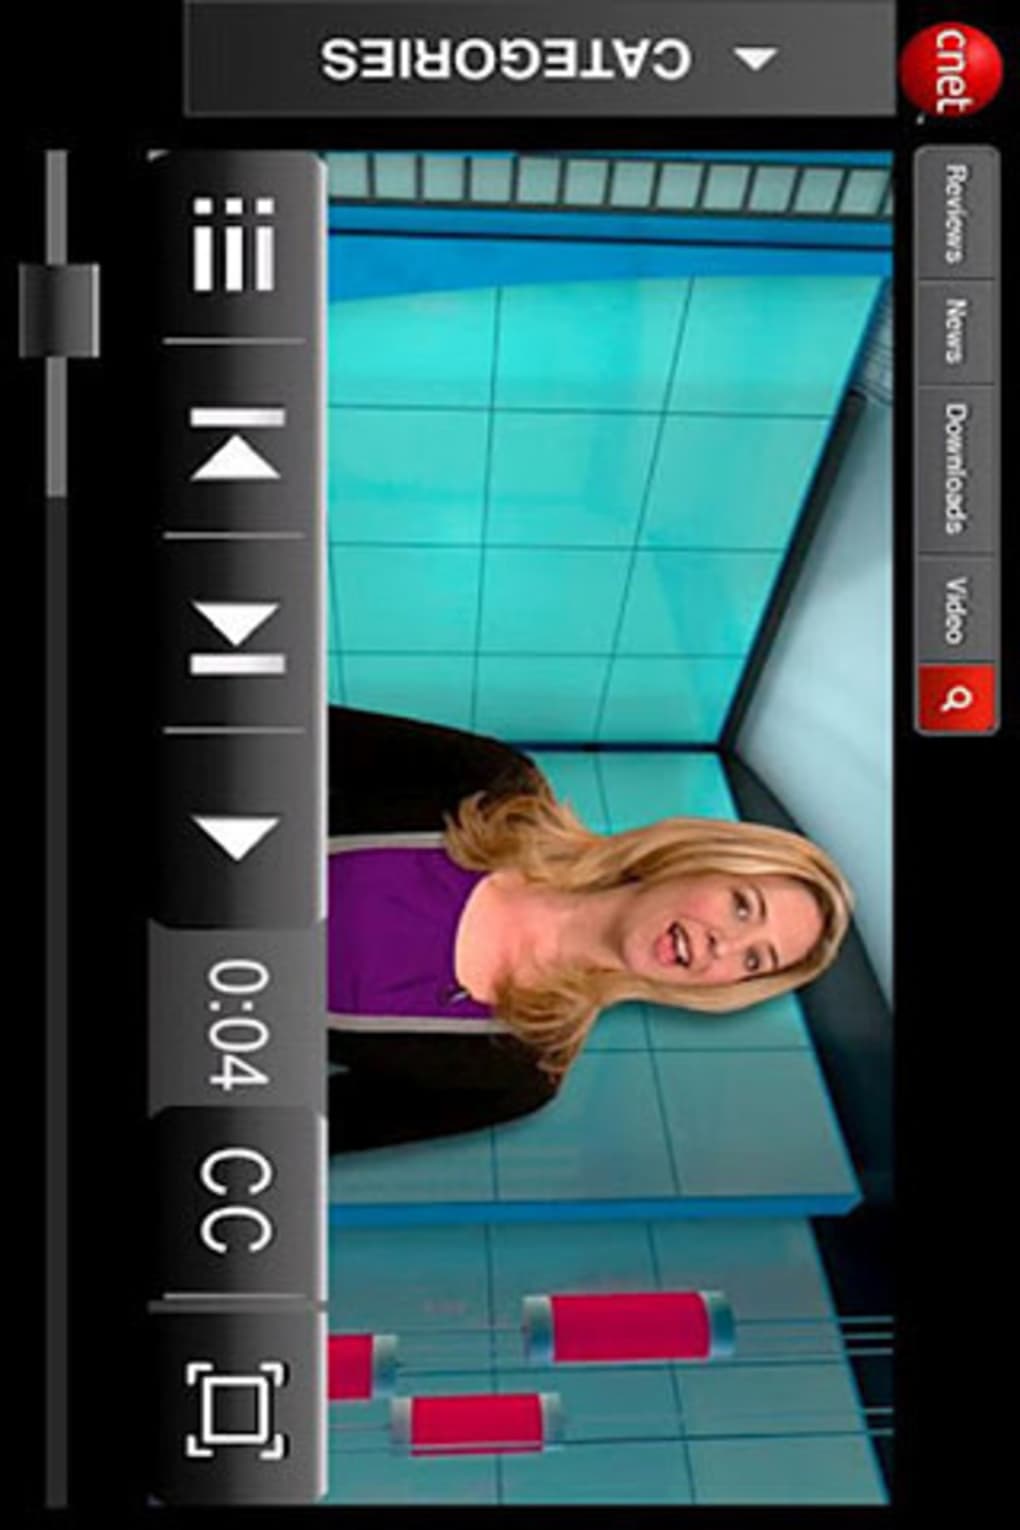 Adobe flash player 11.1 for android